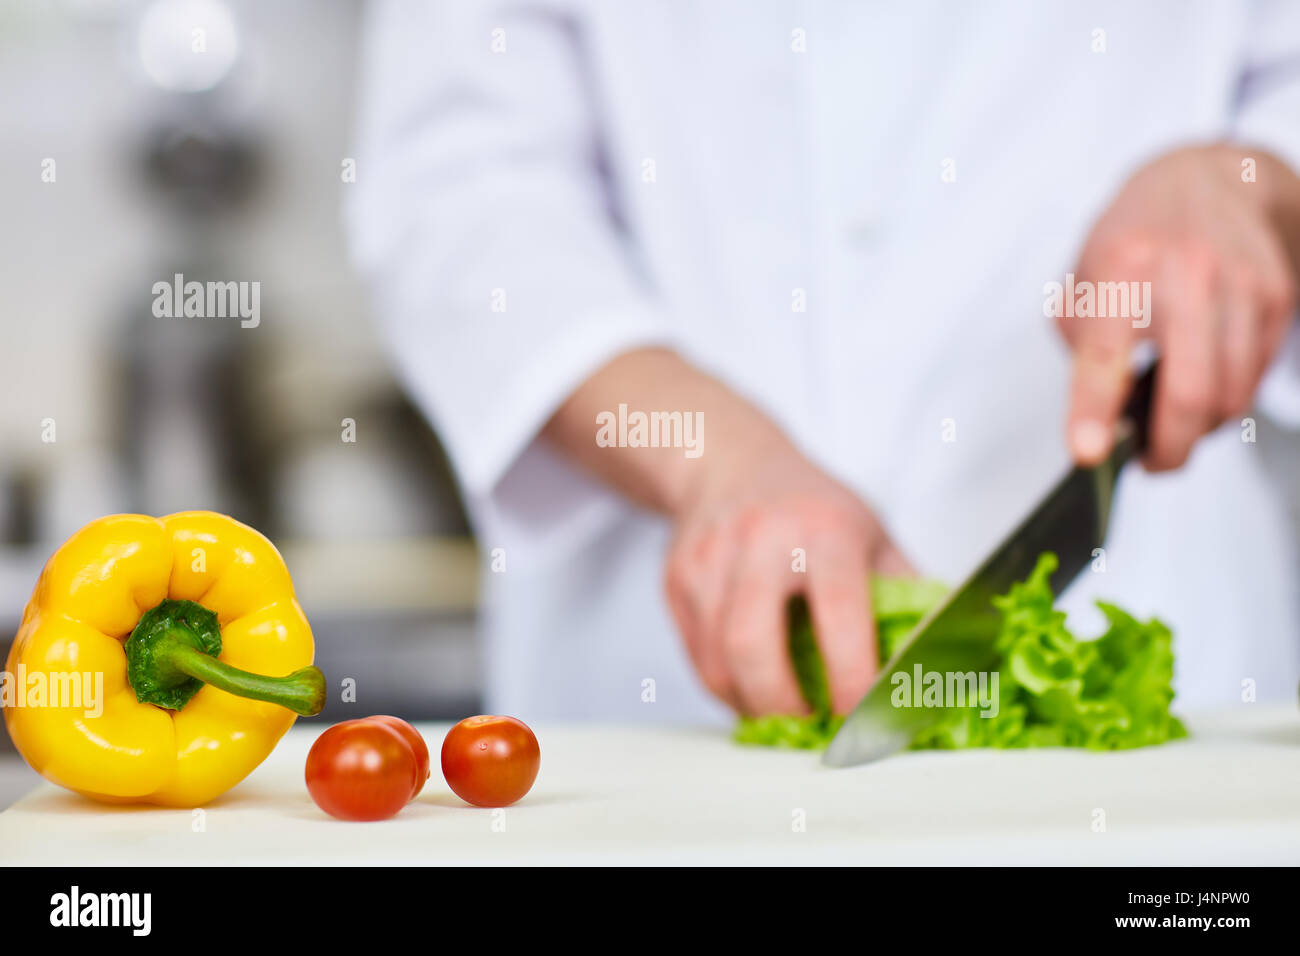 Gresh yellow pepper and ripe tomatoes on workplace of chef Stock Photo